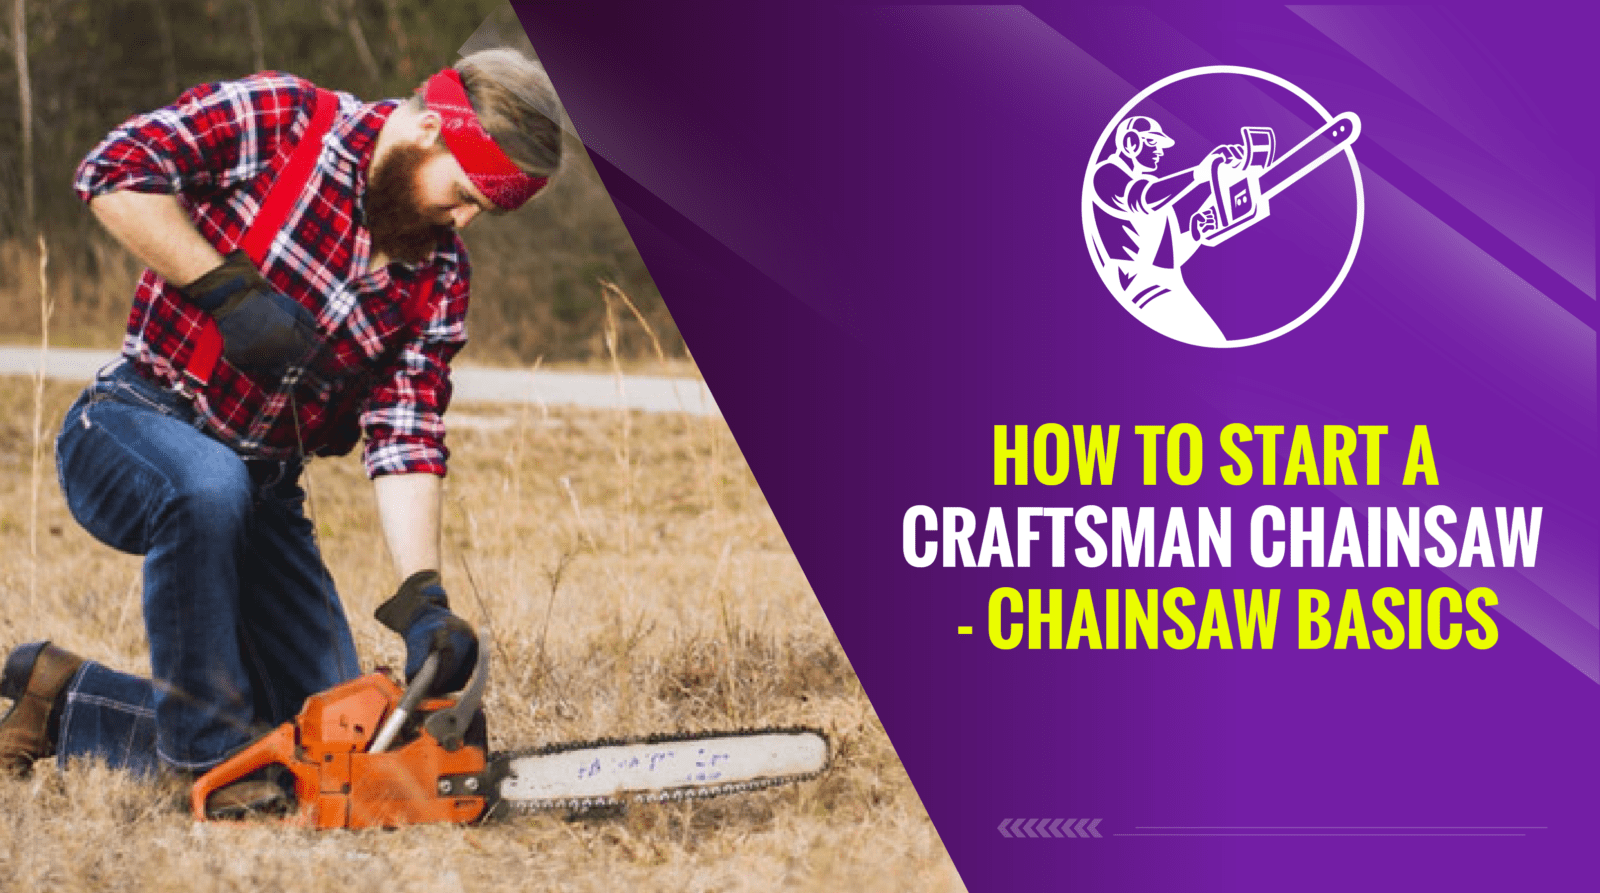 How to Start a Craftsman Chainsaw - Chainsaw Basics